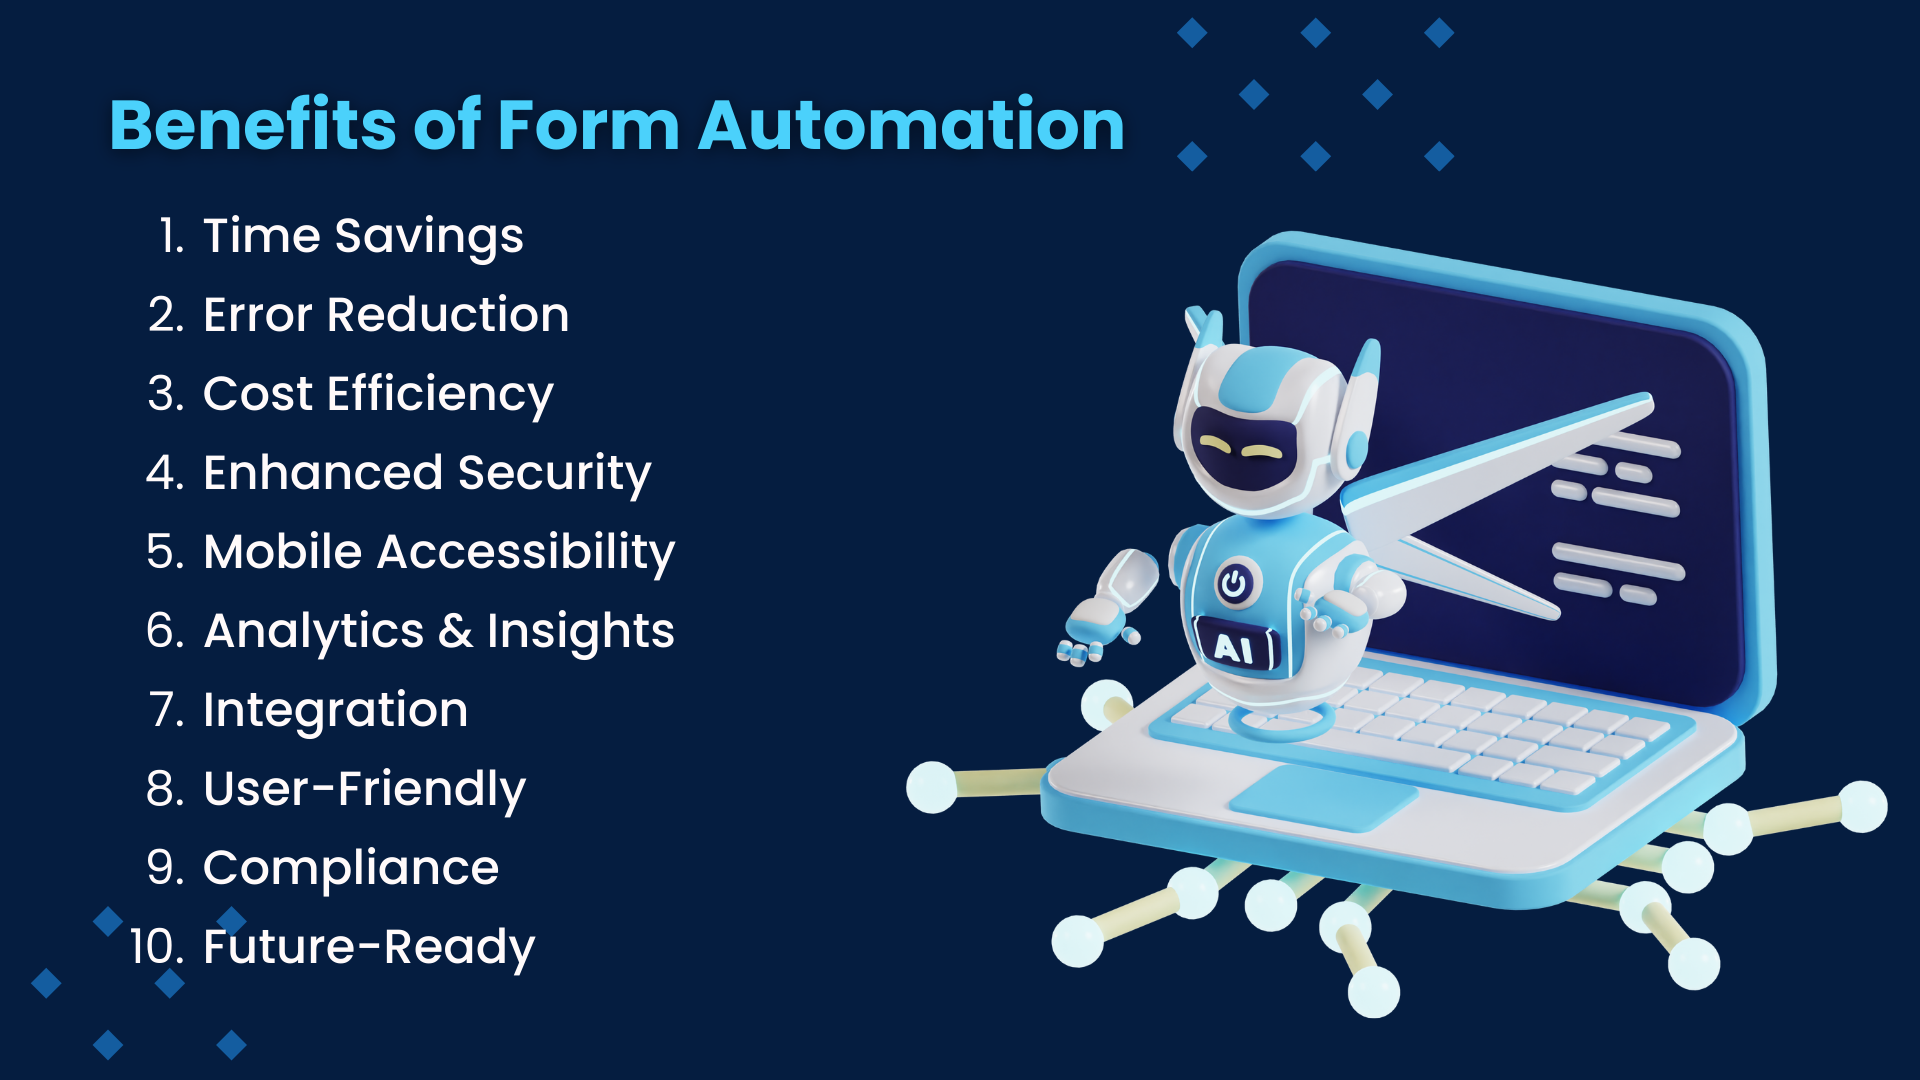 Benefits of Form Automation